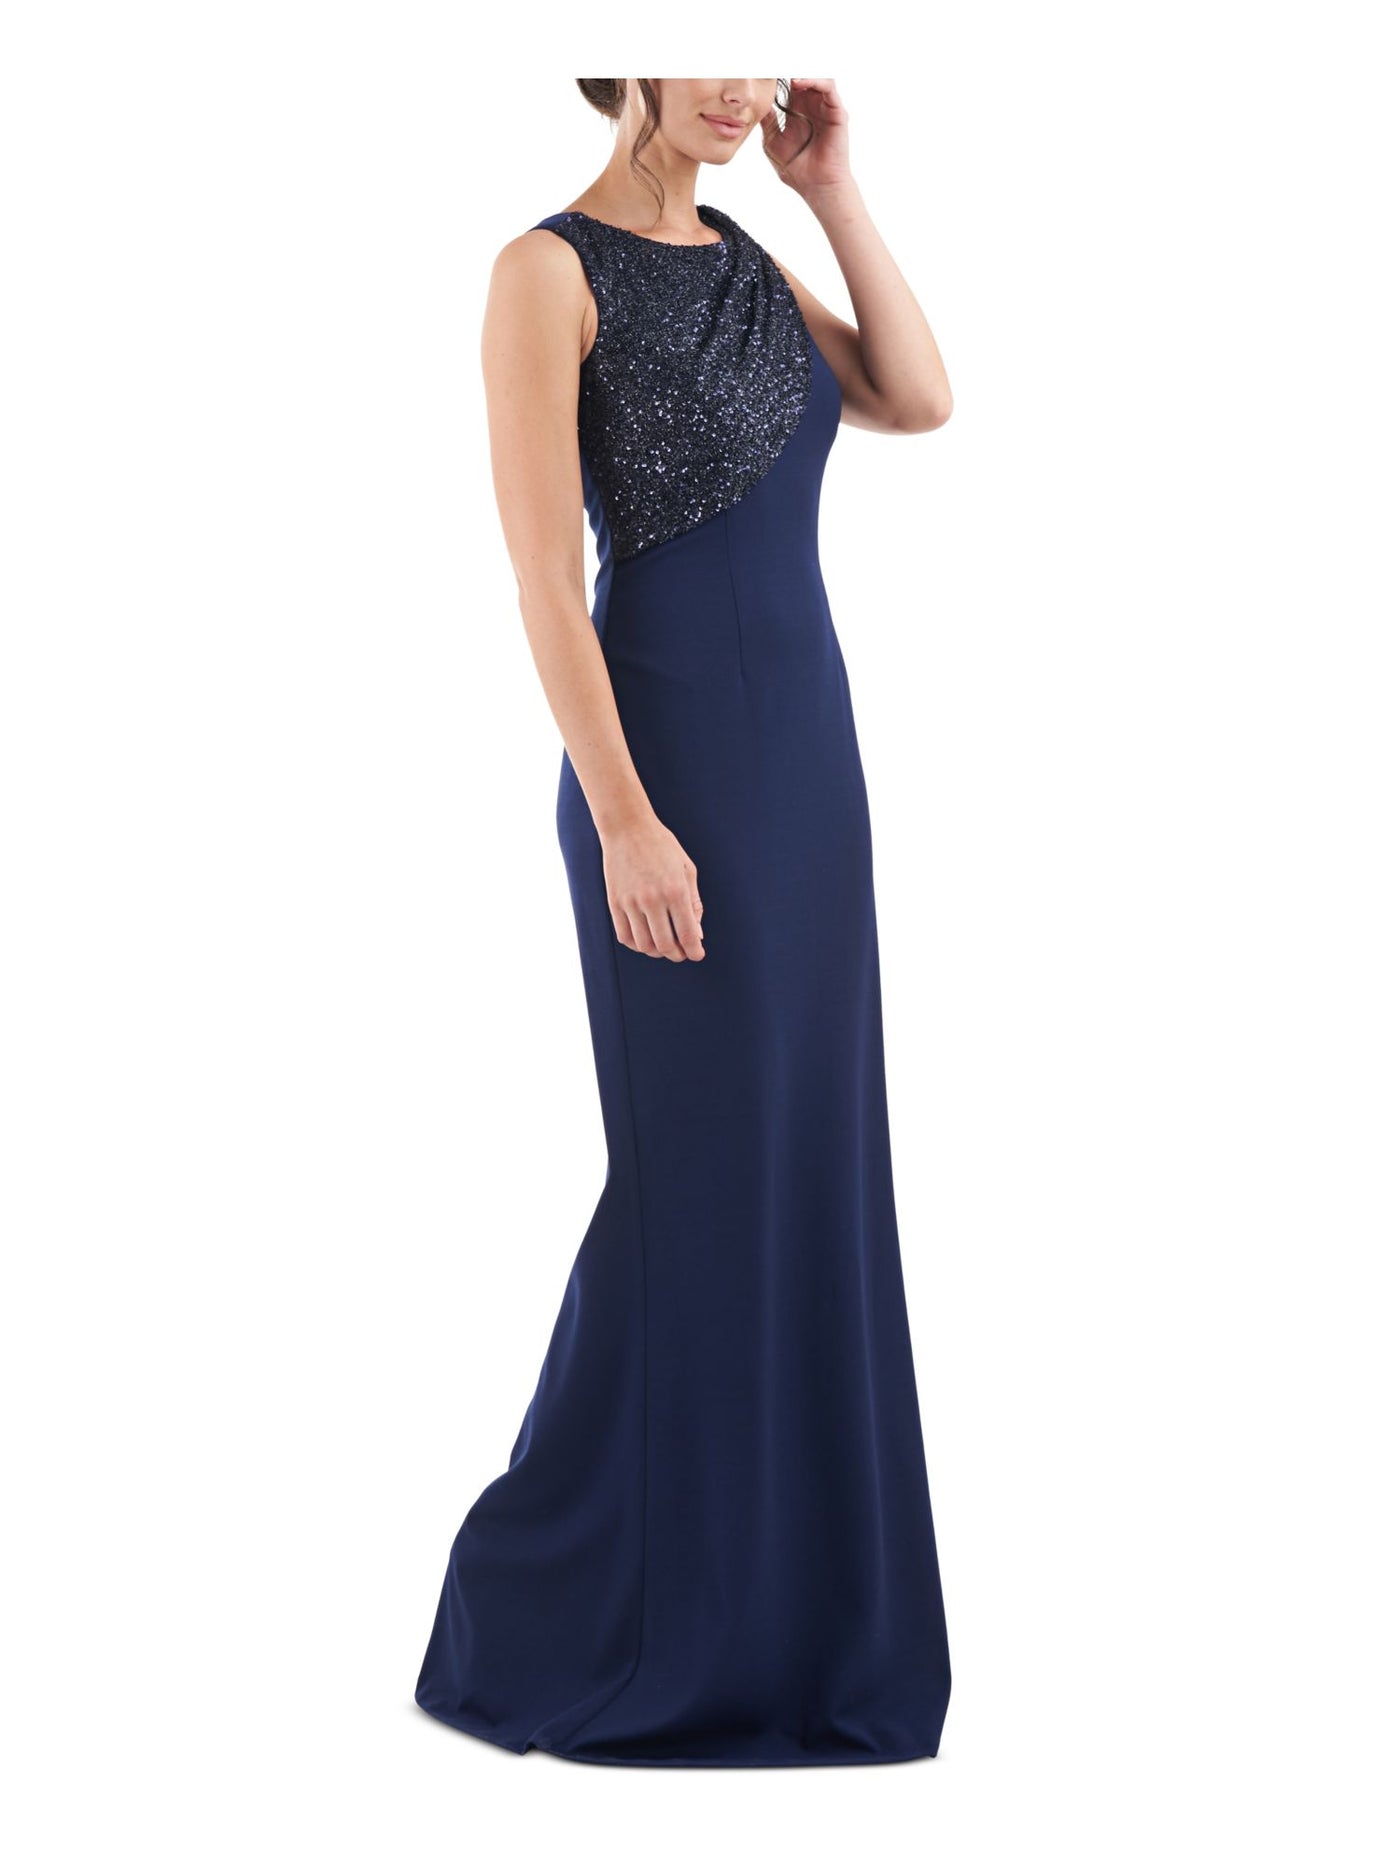 JS COLLECTIONS Womens Navy Sequined Zippered Sleeveless Round Neck Full-Length Cocktail Gown Dress 16